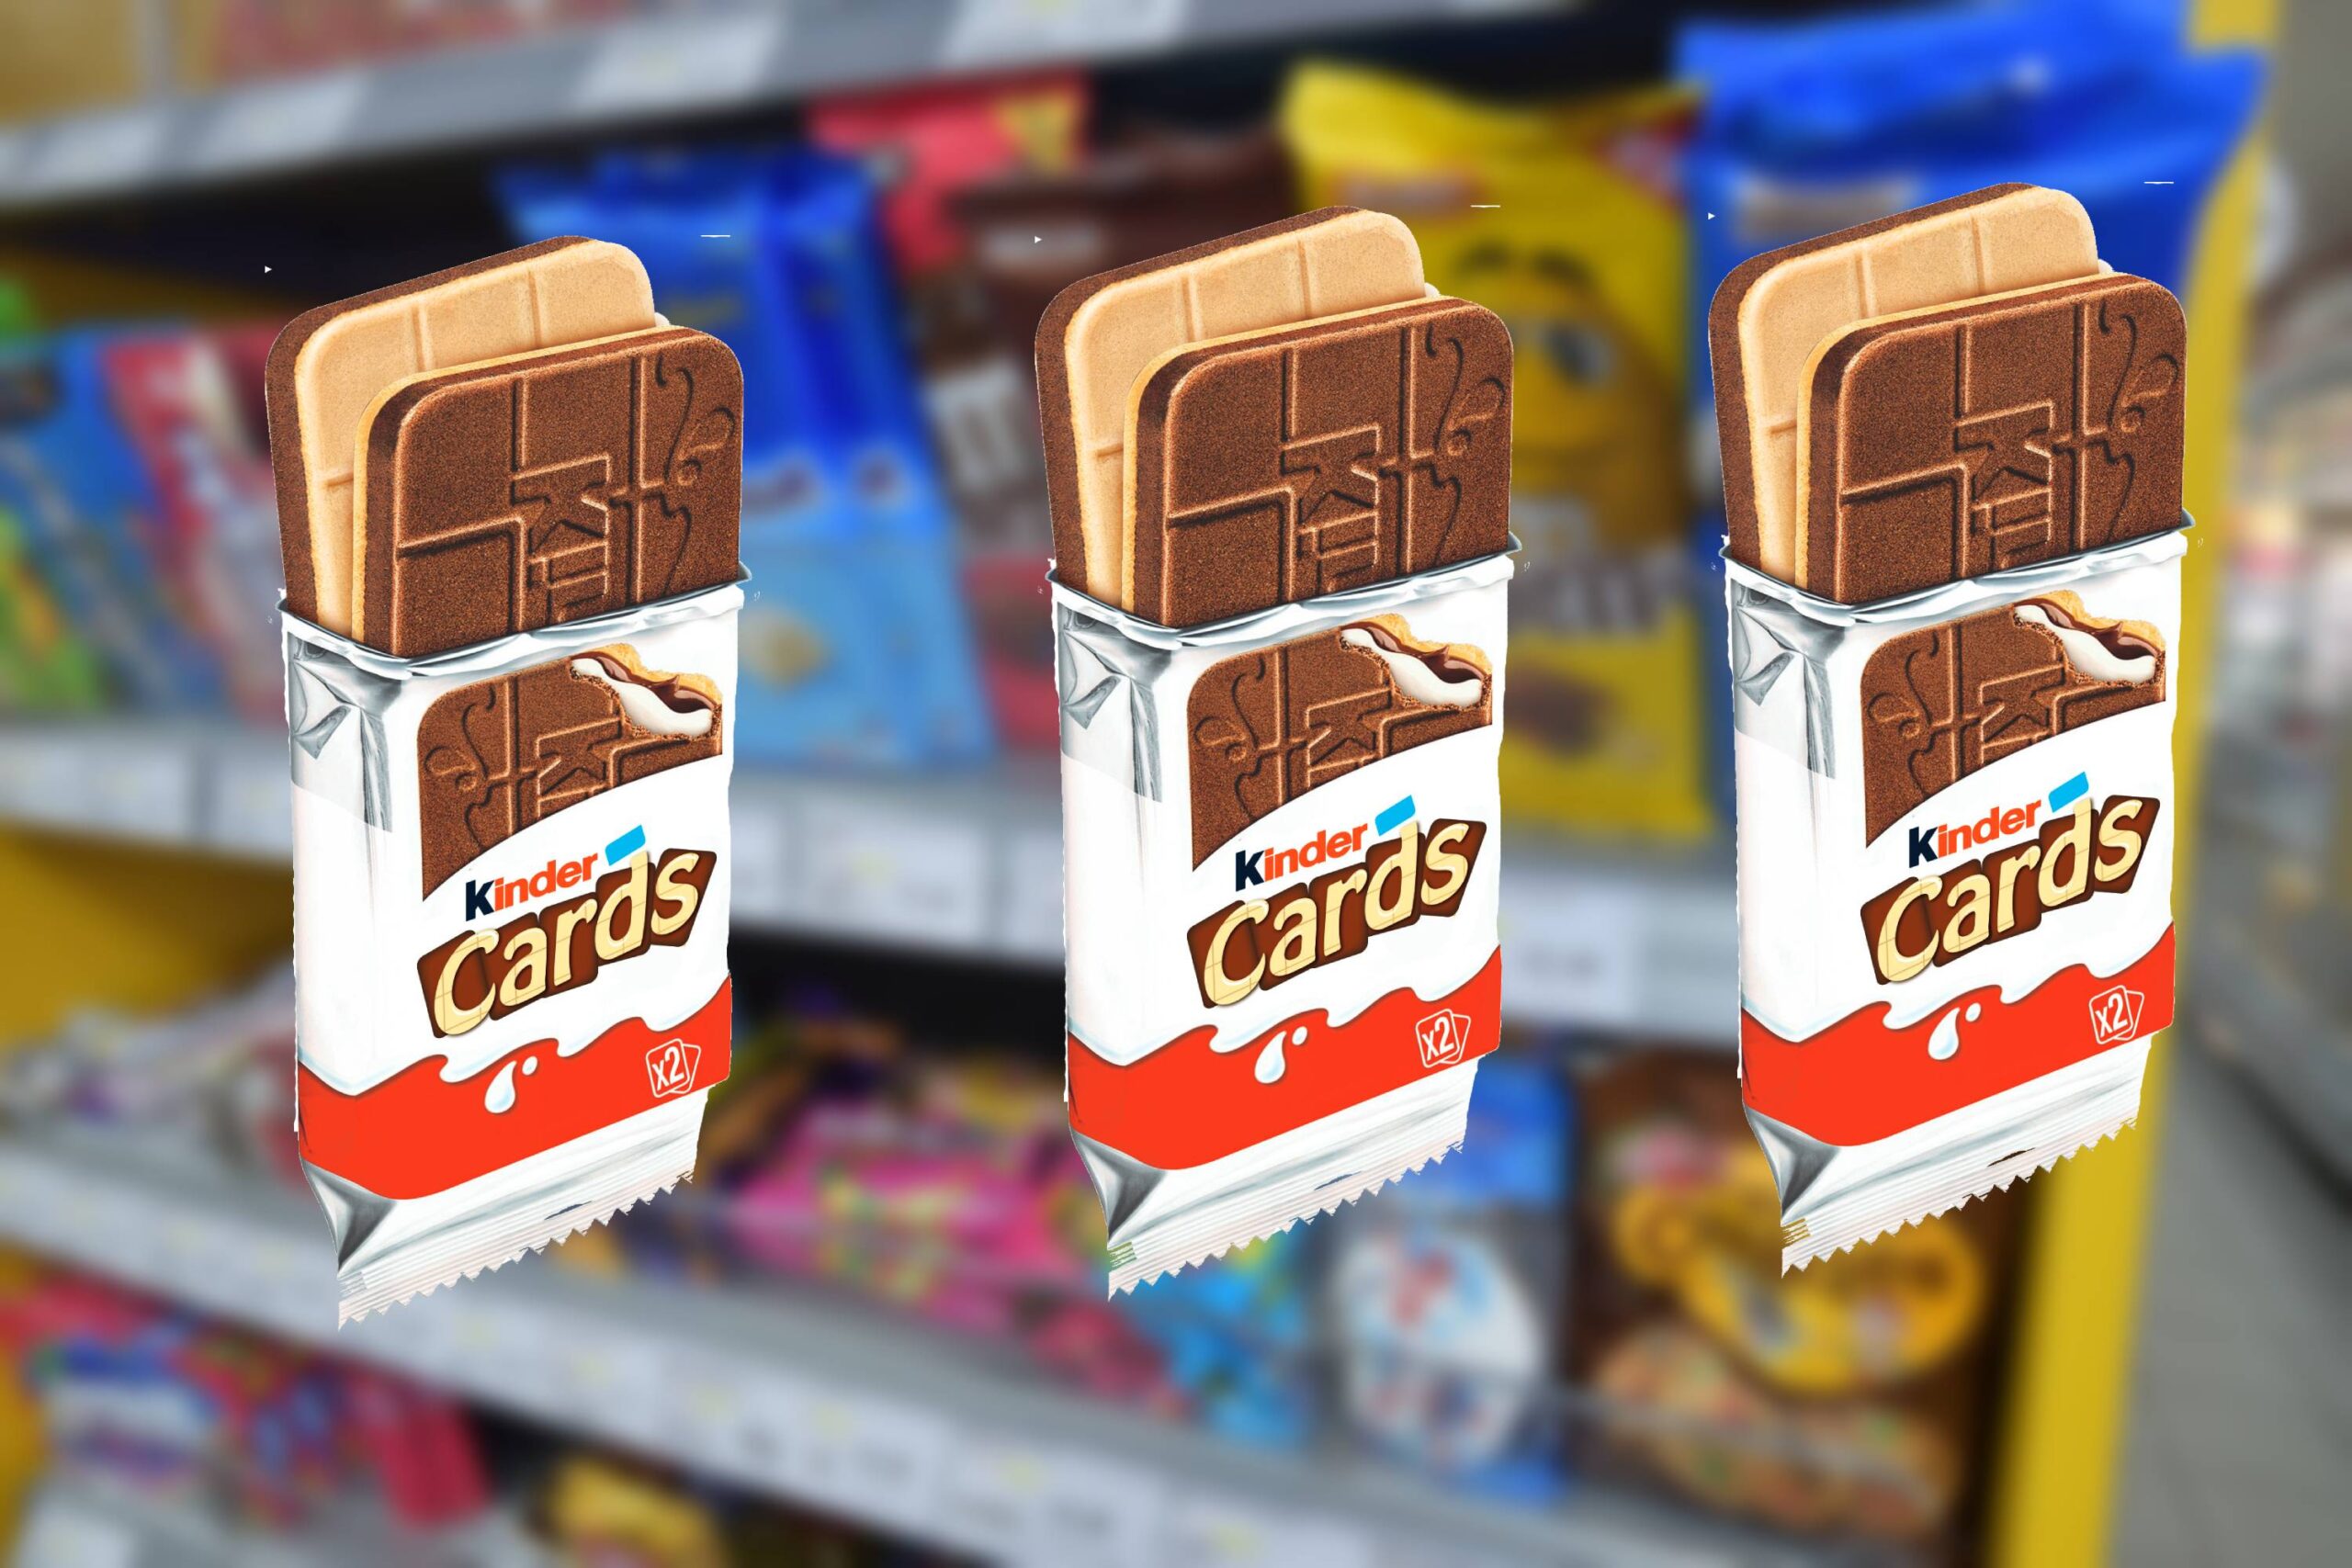 Kinder Cards hit the UK convenience sector